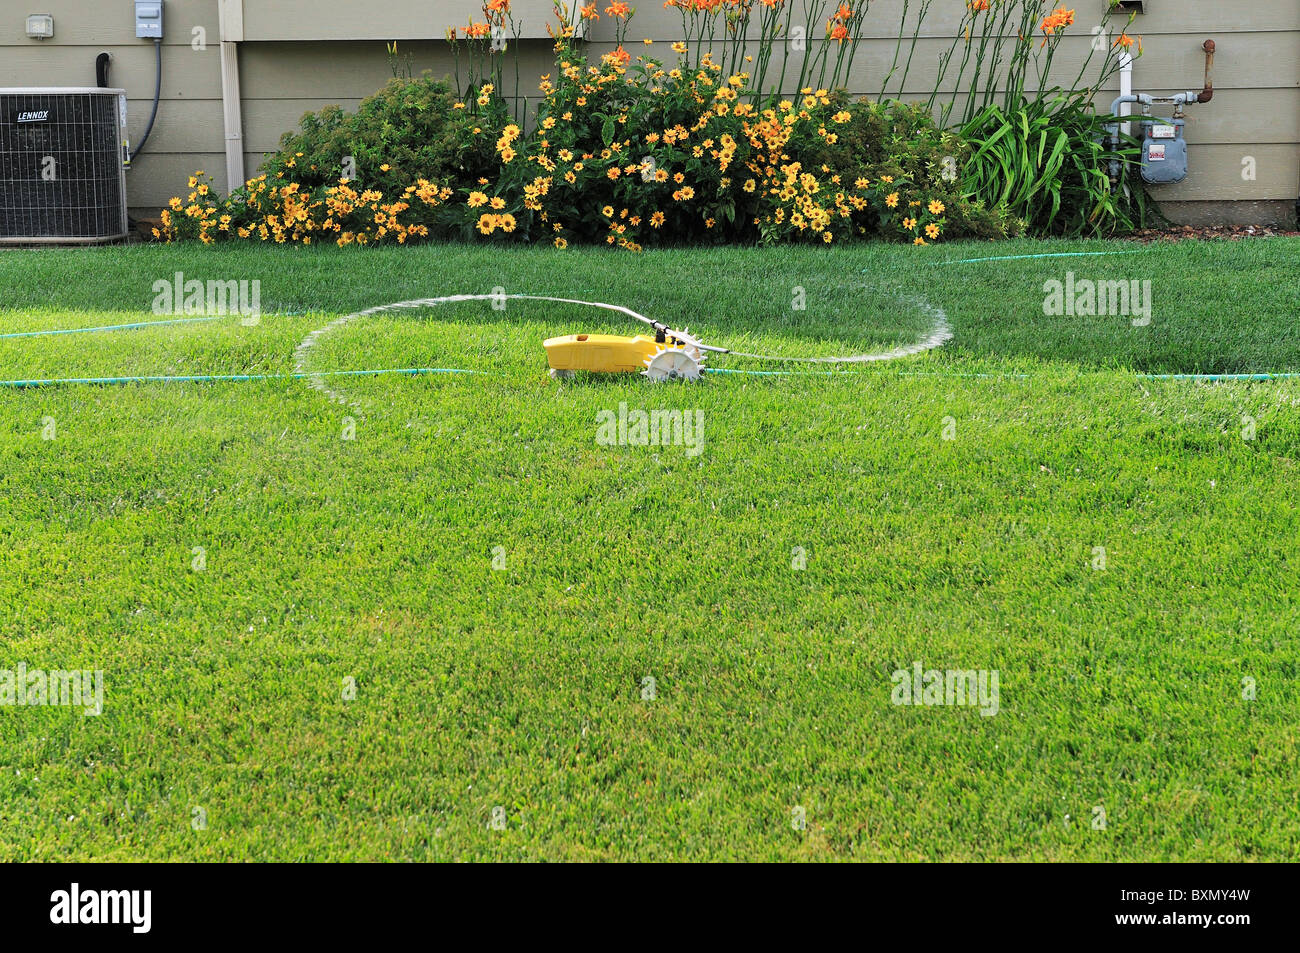 A traveling tractor lawn sprinkler waters a lawn in Wichita, Kansas, USA. Stock Photo